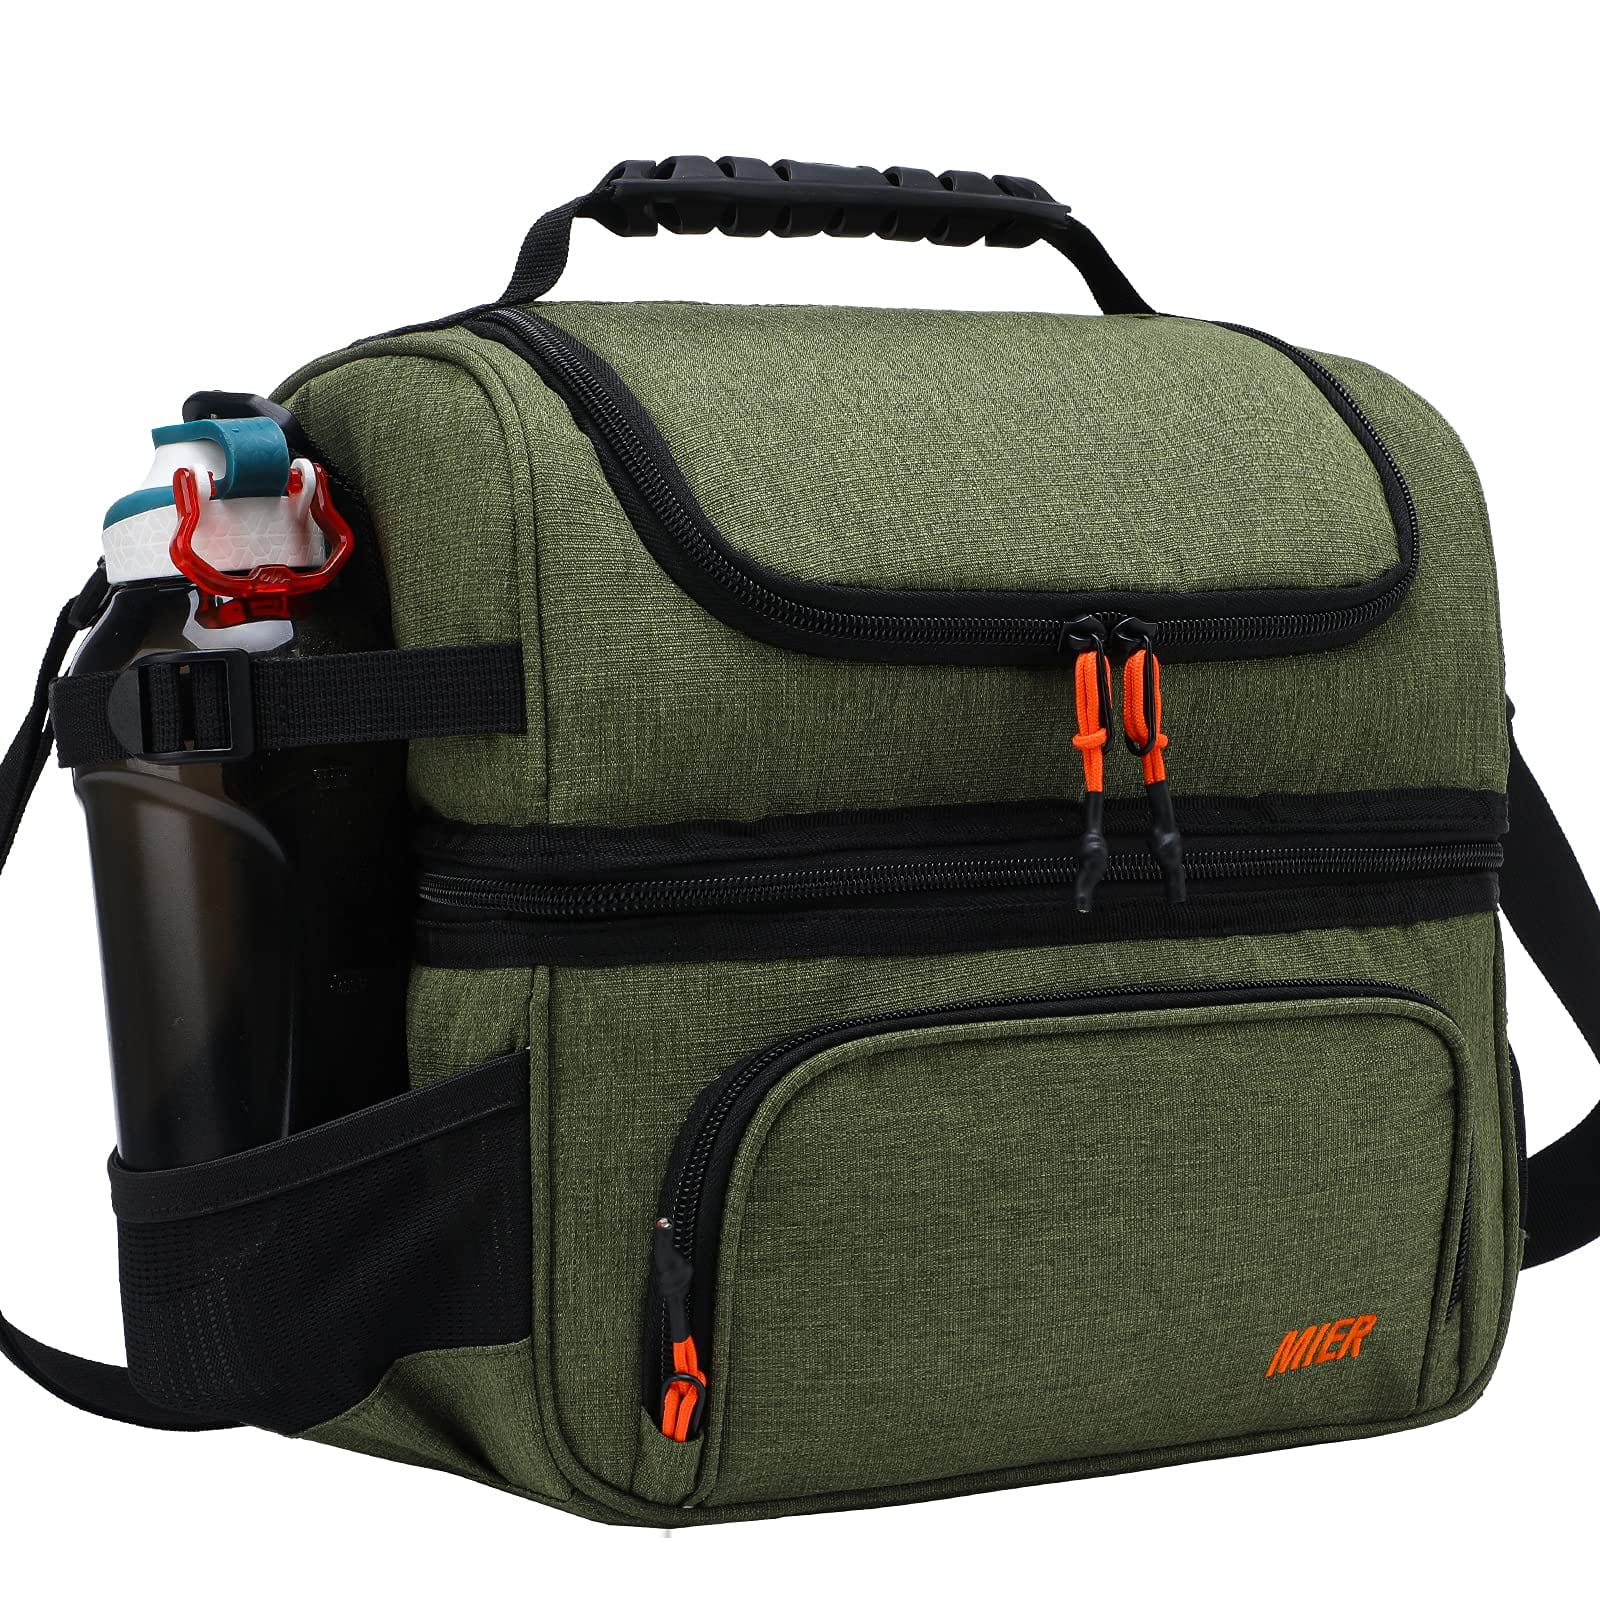 Large Insulated Lunch Bag Cooler Tote Dual Compartment, Army Green